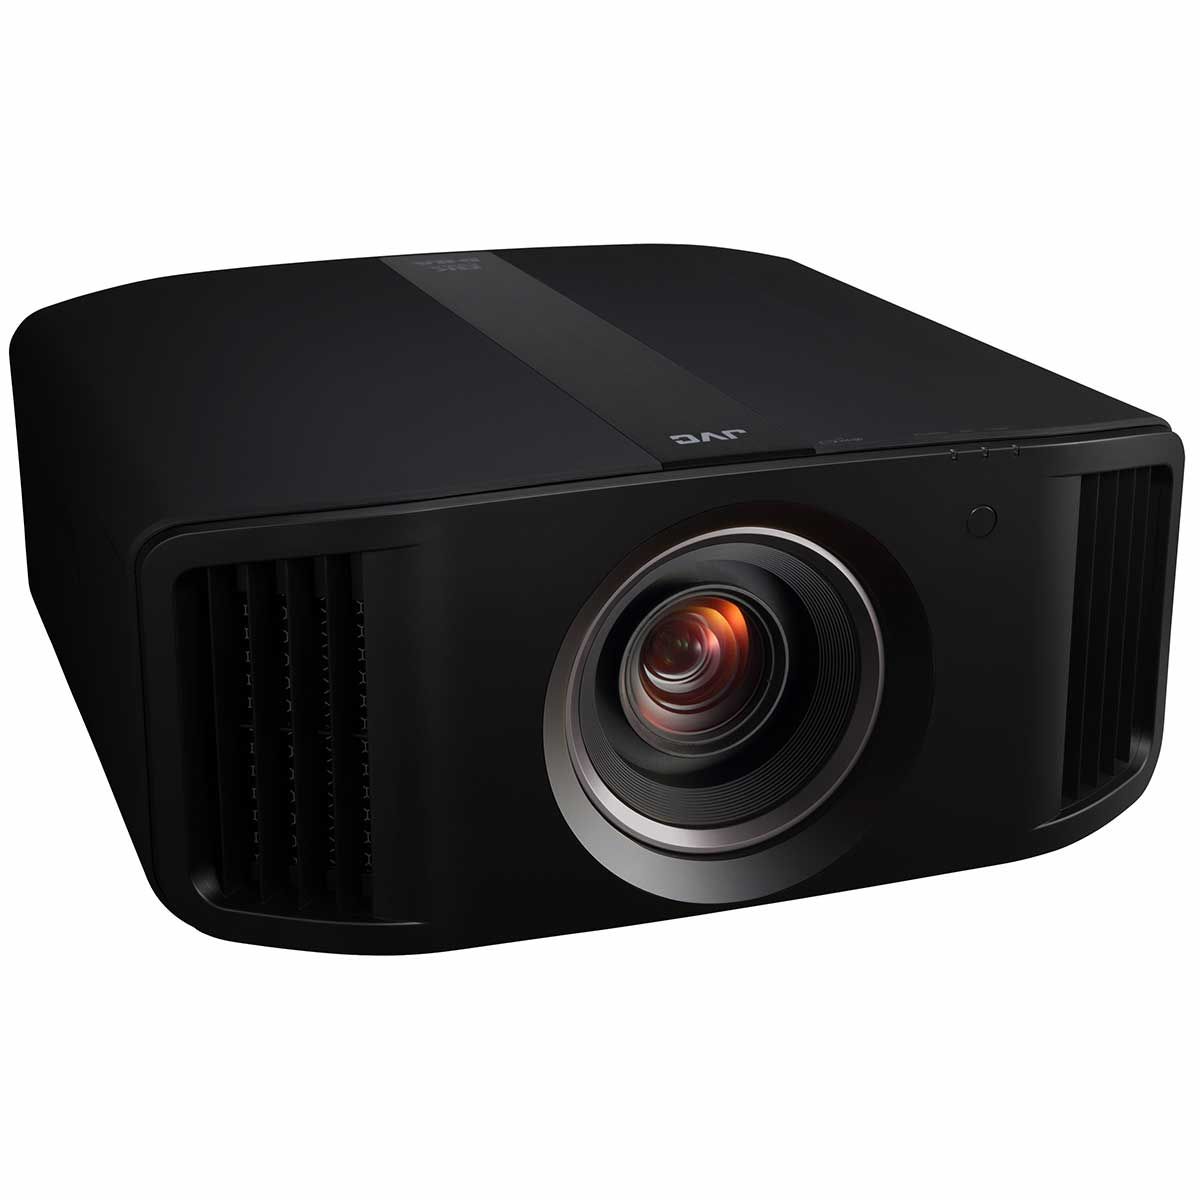 JVC DLA-NZ800 8K Home Theater Projector angled front left view